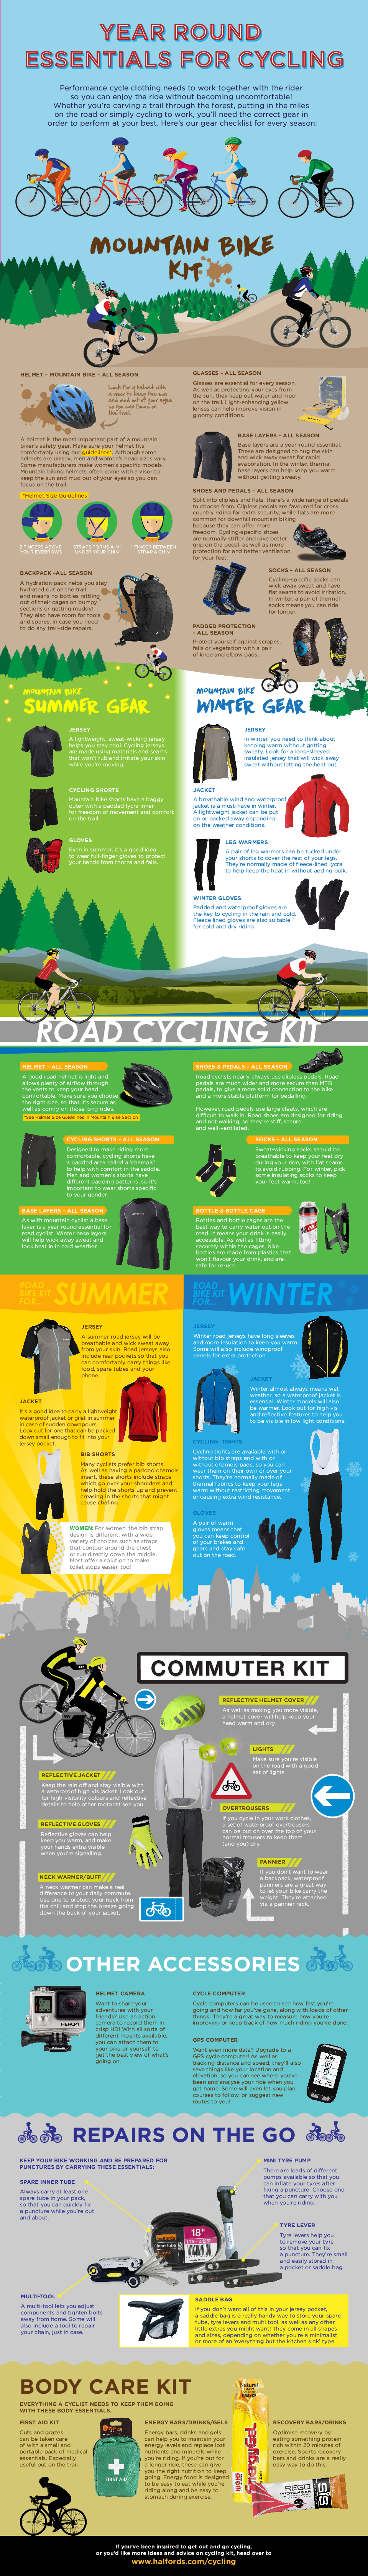 Year round essentials for cycling Final Version